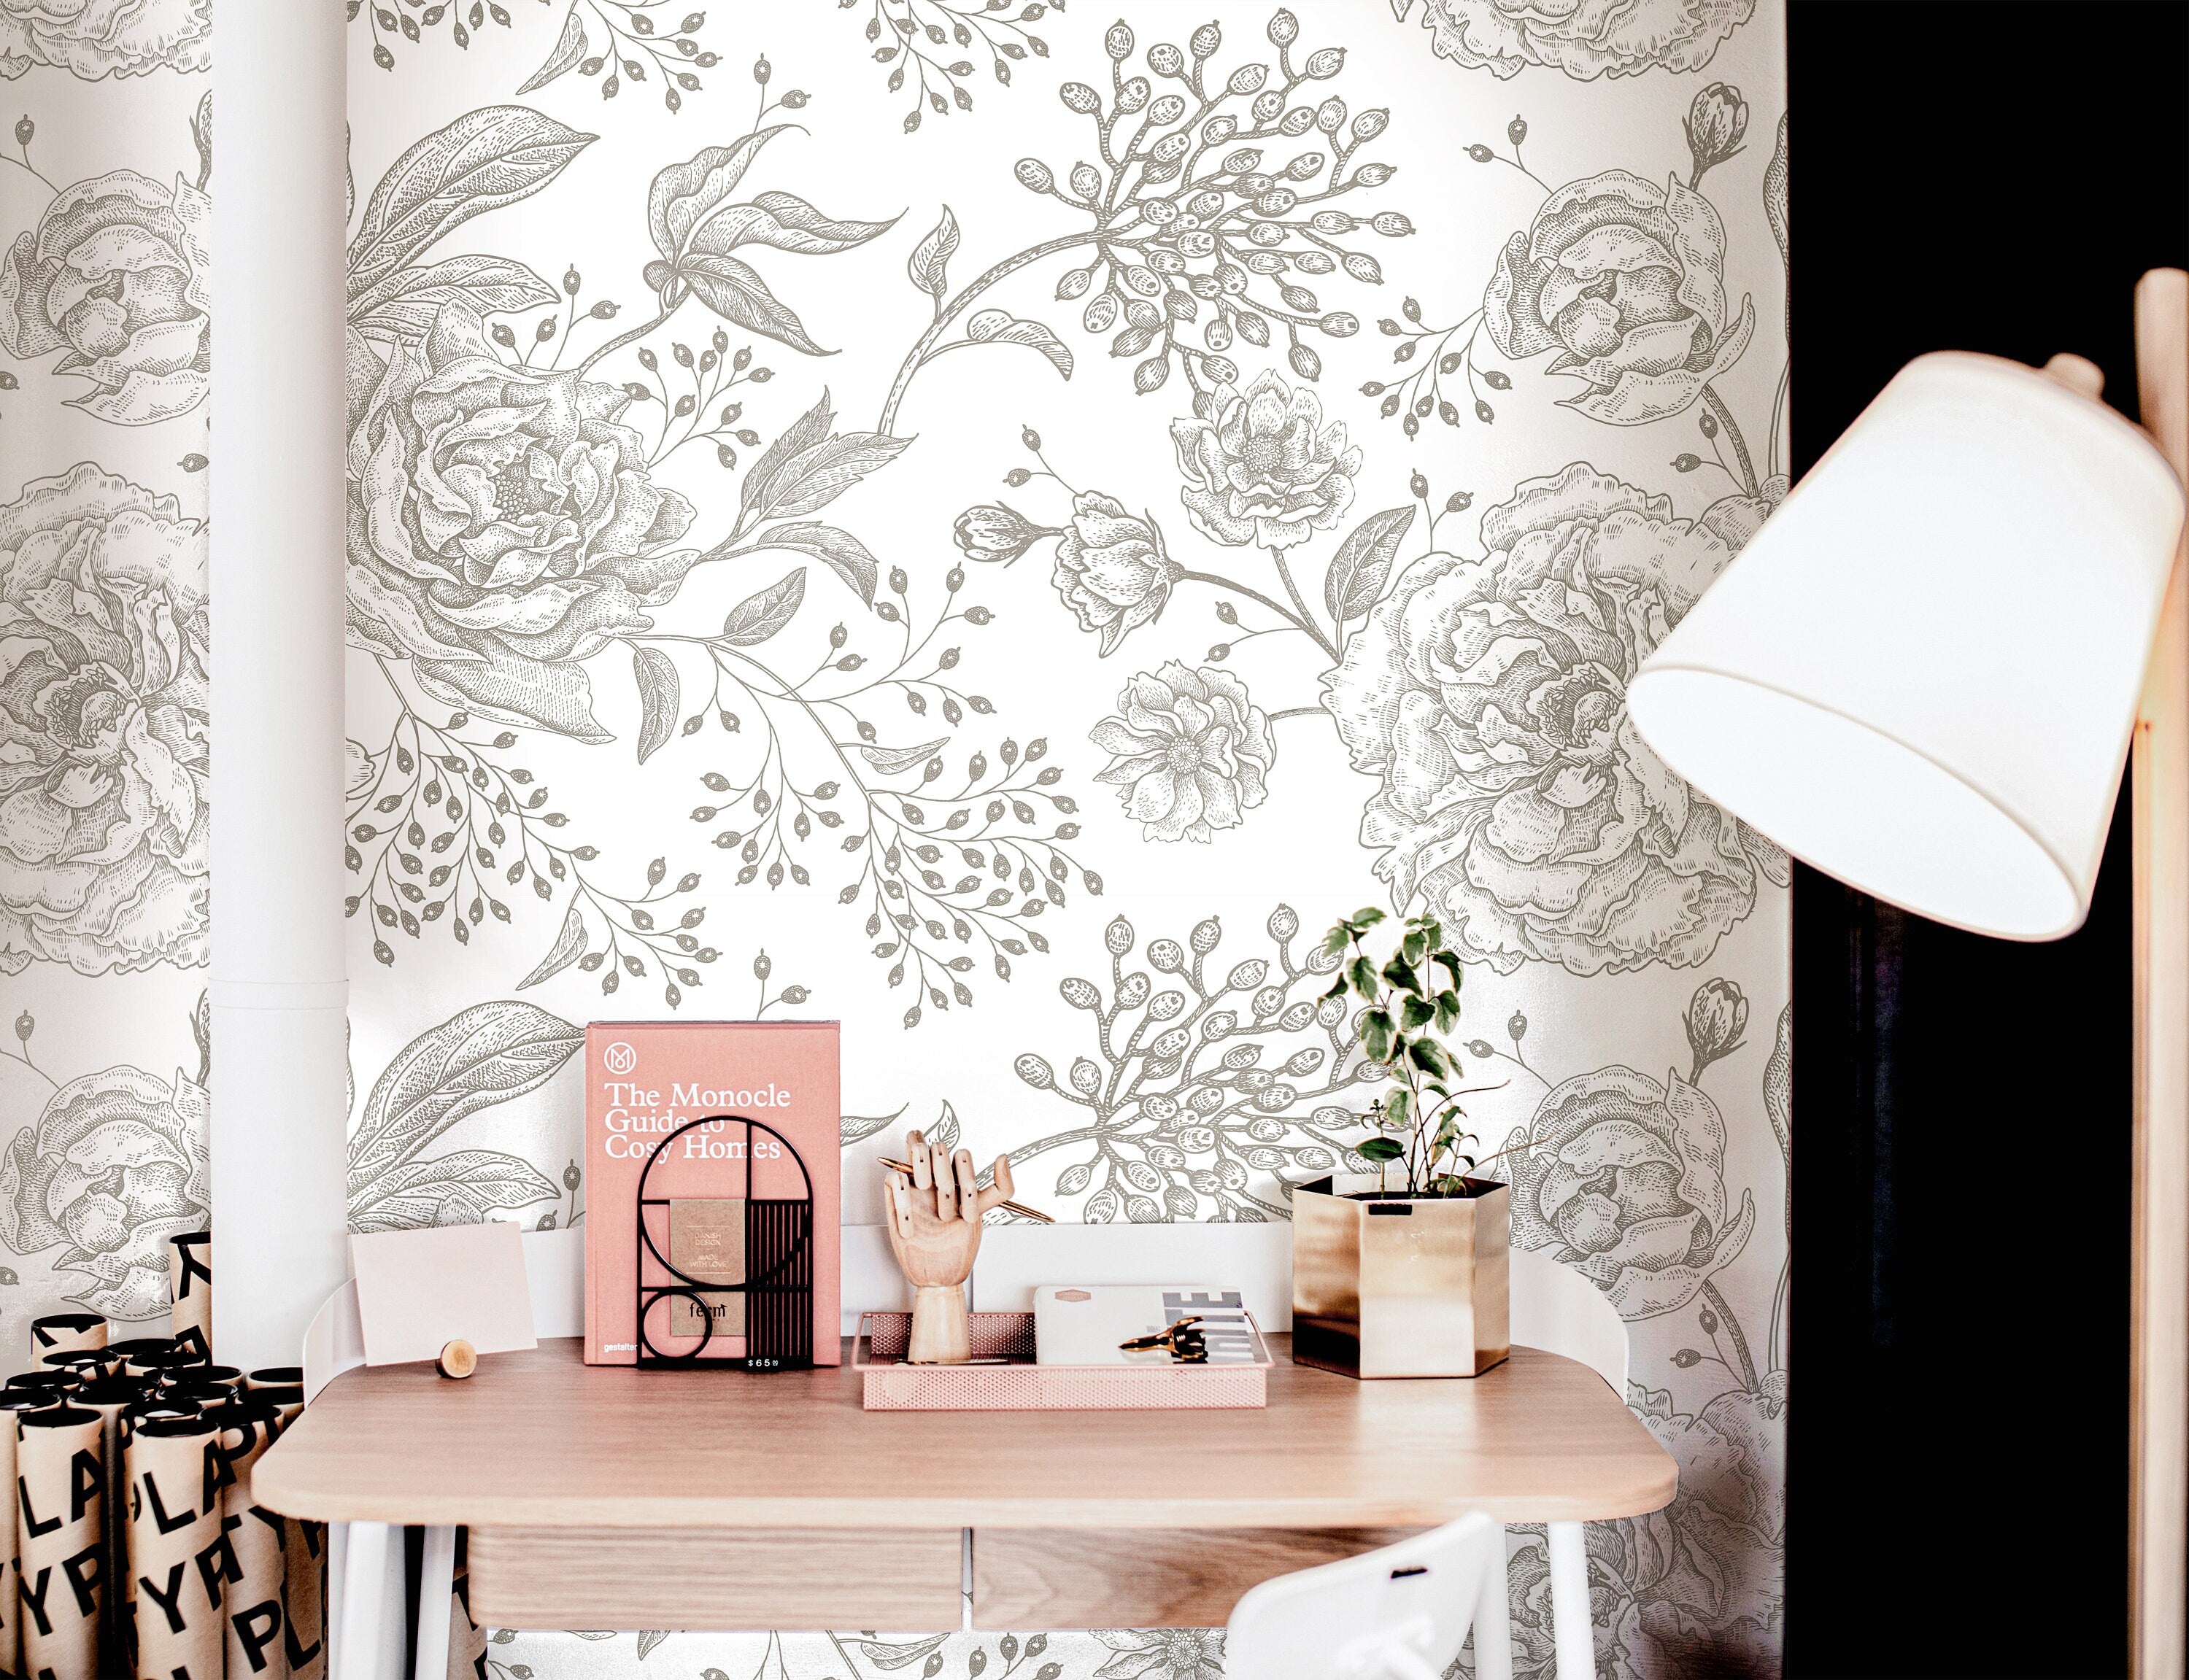 Wallpaper Peel and Stick Wallpaper Large Outline Floral Removable Wallpaper Wall Decor Home Decor Wall Art Room Decor 3779 - JamesAndColors